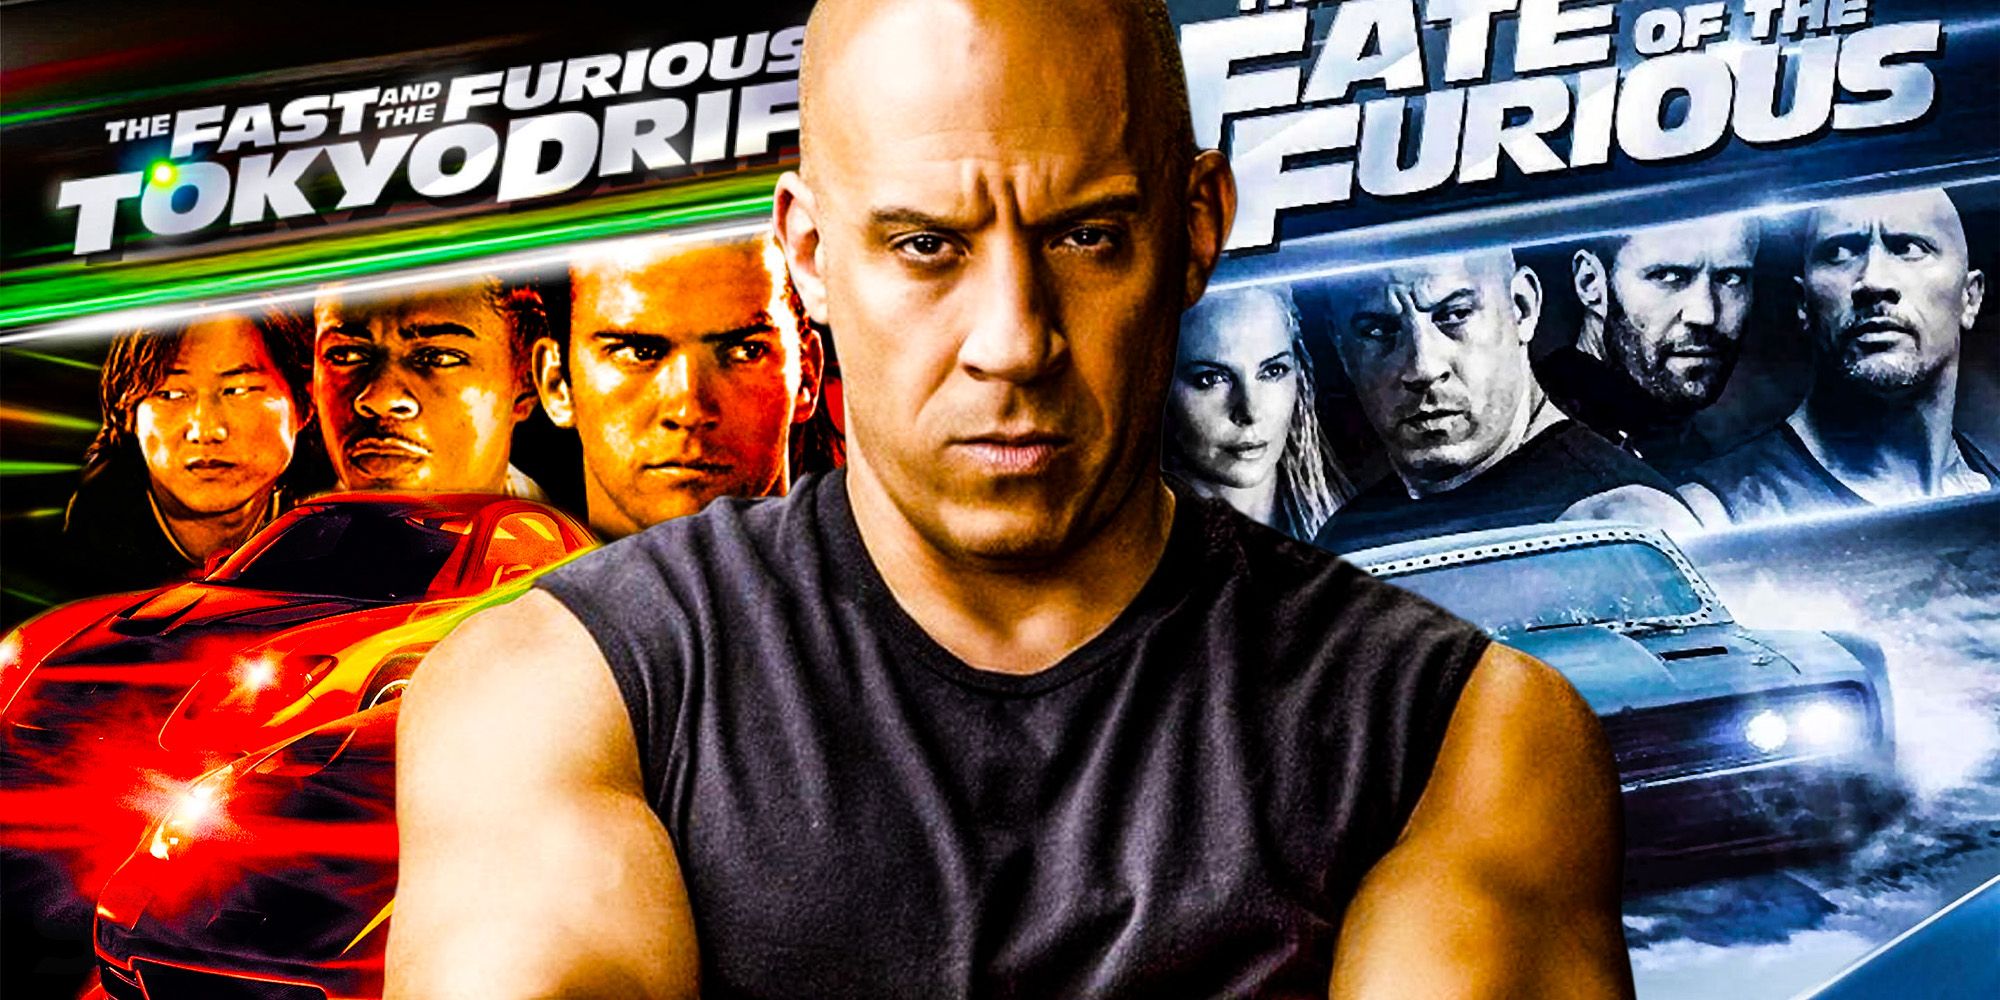 F9 and the Fast & Furious movie franchise, explained - Vox